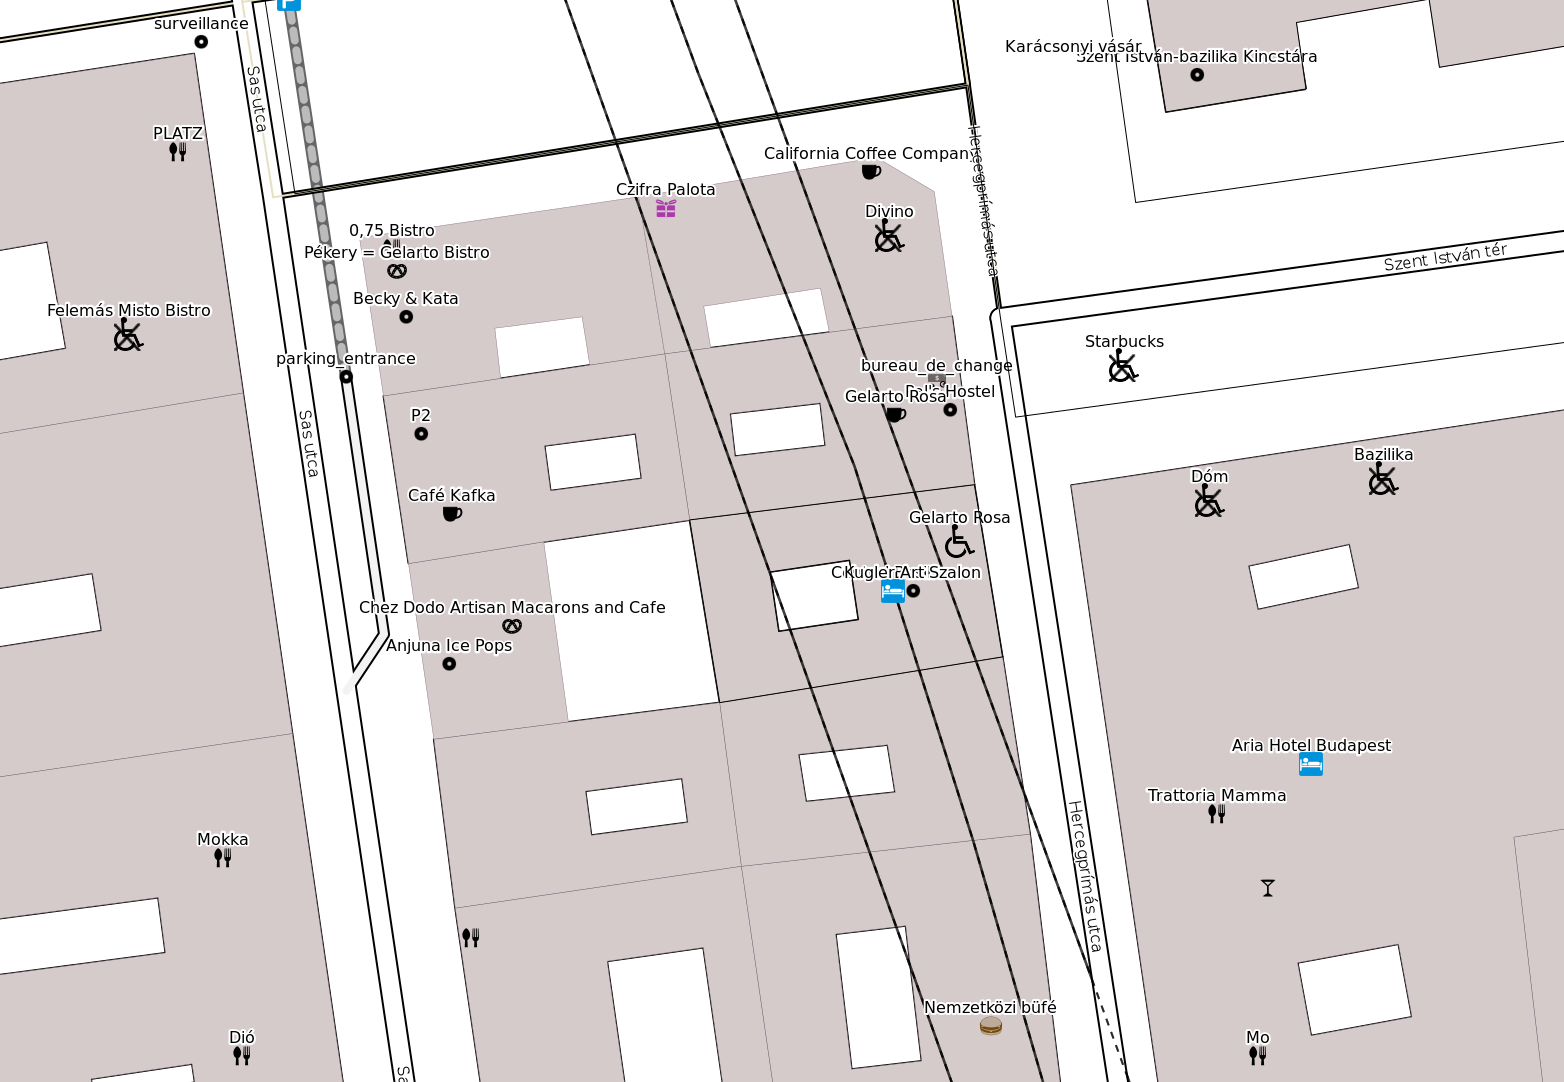 Map part, shows POIs with wheelchair accessibility icons.